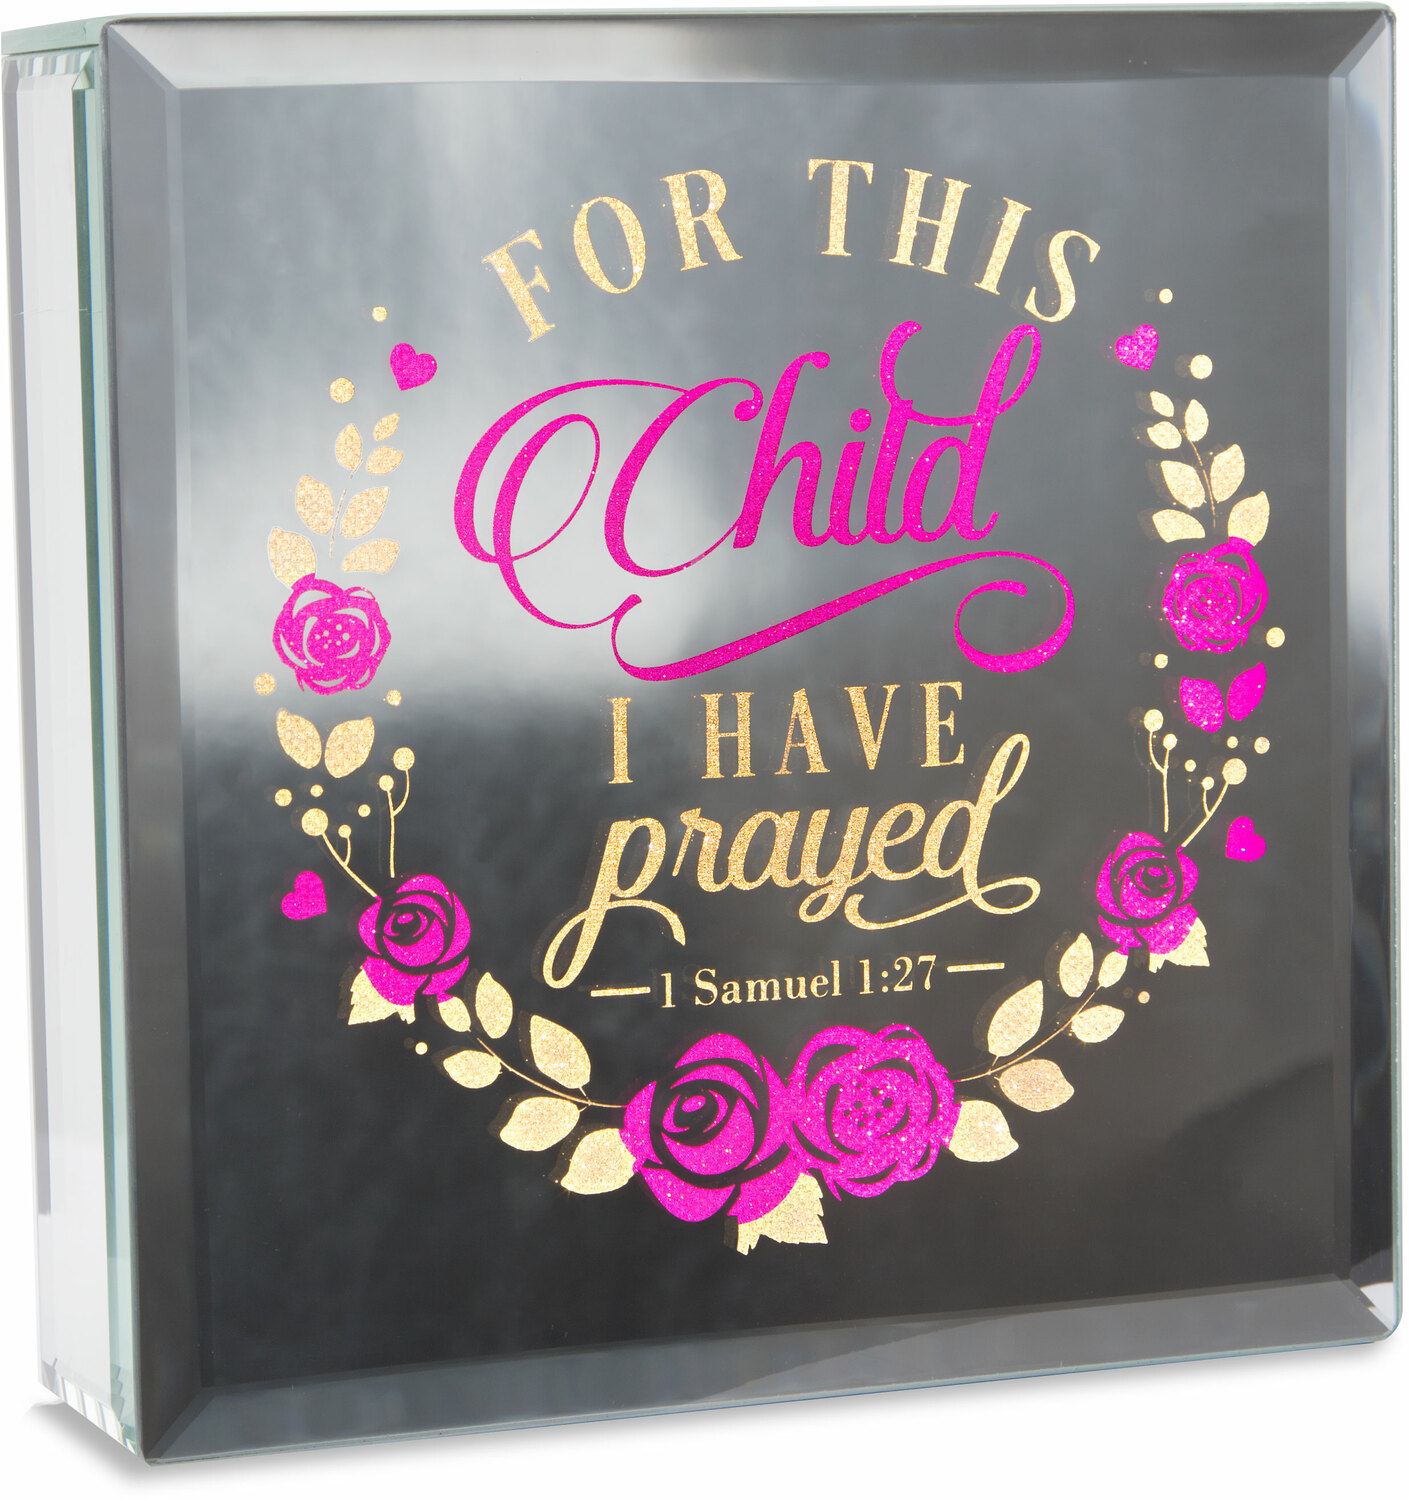 Child by Reflections of You - Child - 6" Lit-Mirrored Plaque